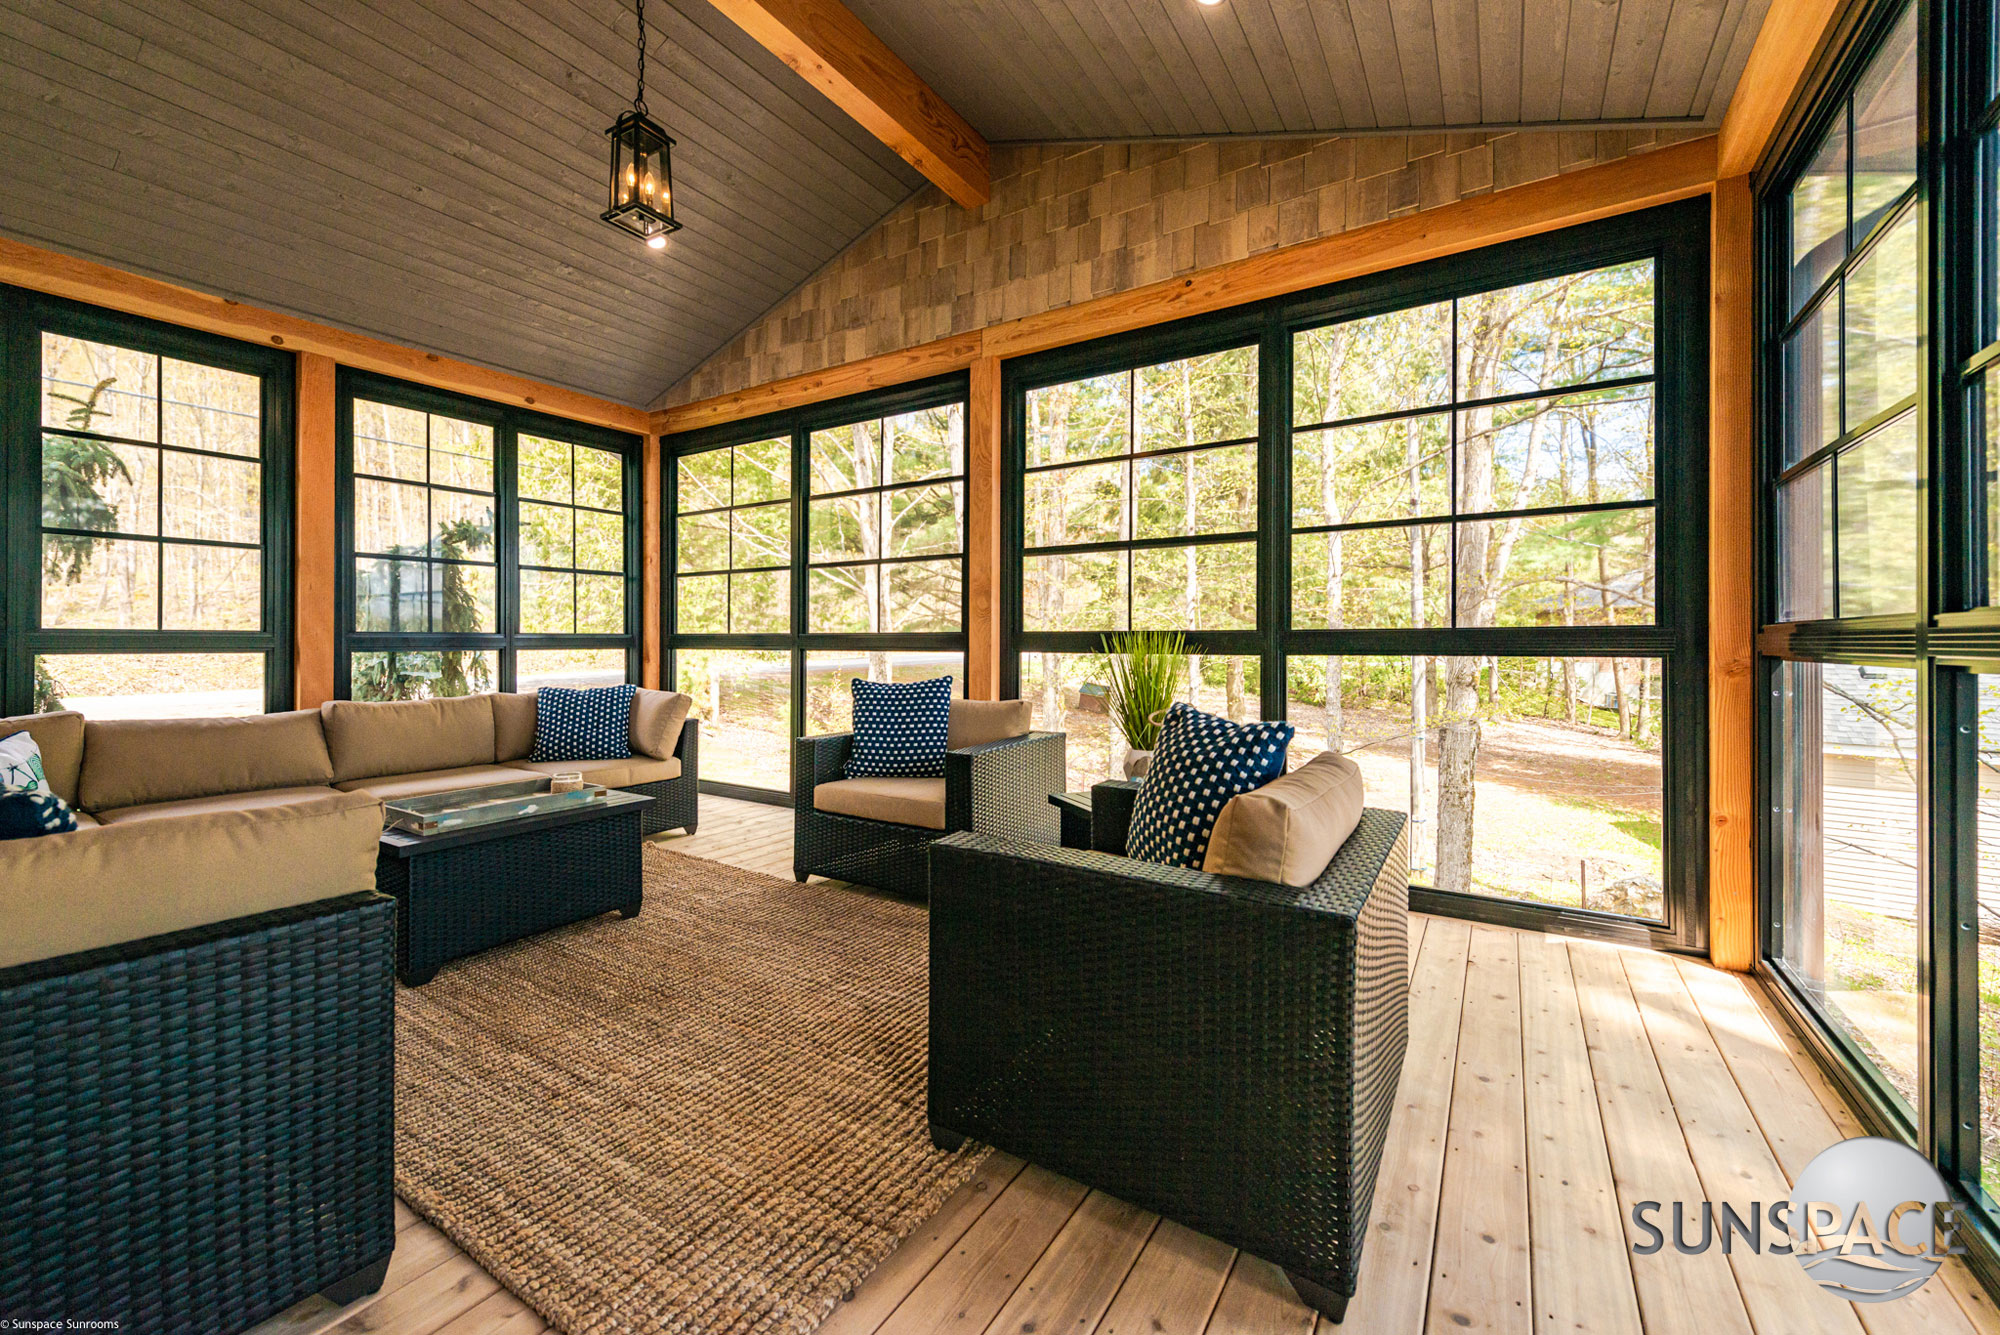 Sunspace Sunrooms New Hampshire Porch Conversion and Walls Under